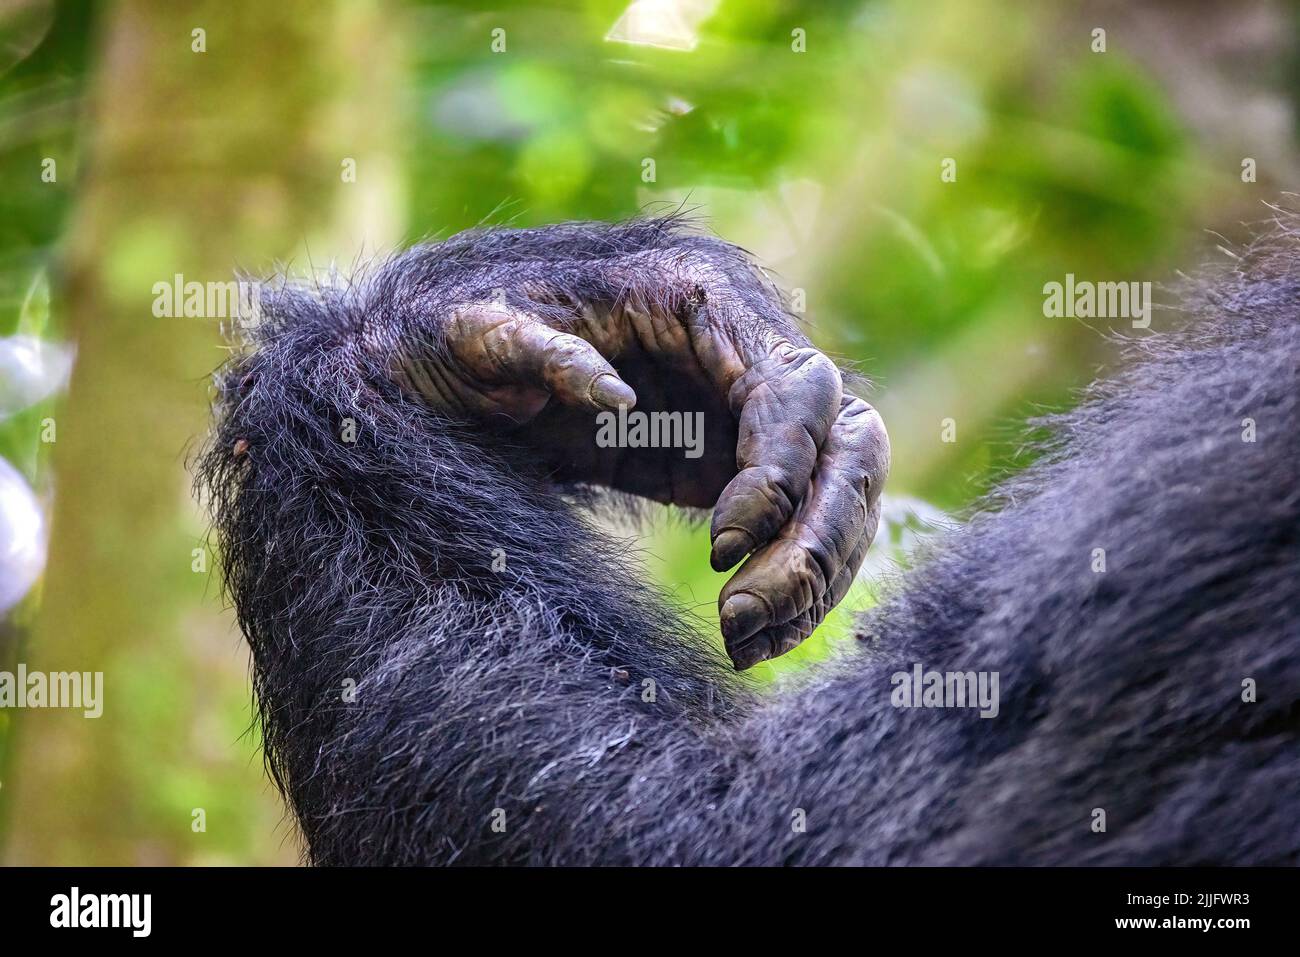 Arm and hand detail of an adult common chimpanzee, pan troglodytes, in Kibale Forest, Uganda A protected area where the endangered chimps are part of Stock Photo